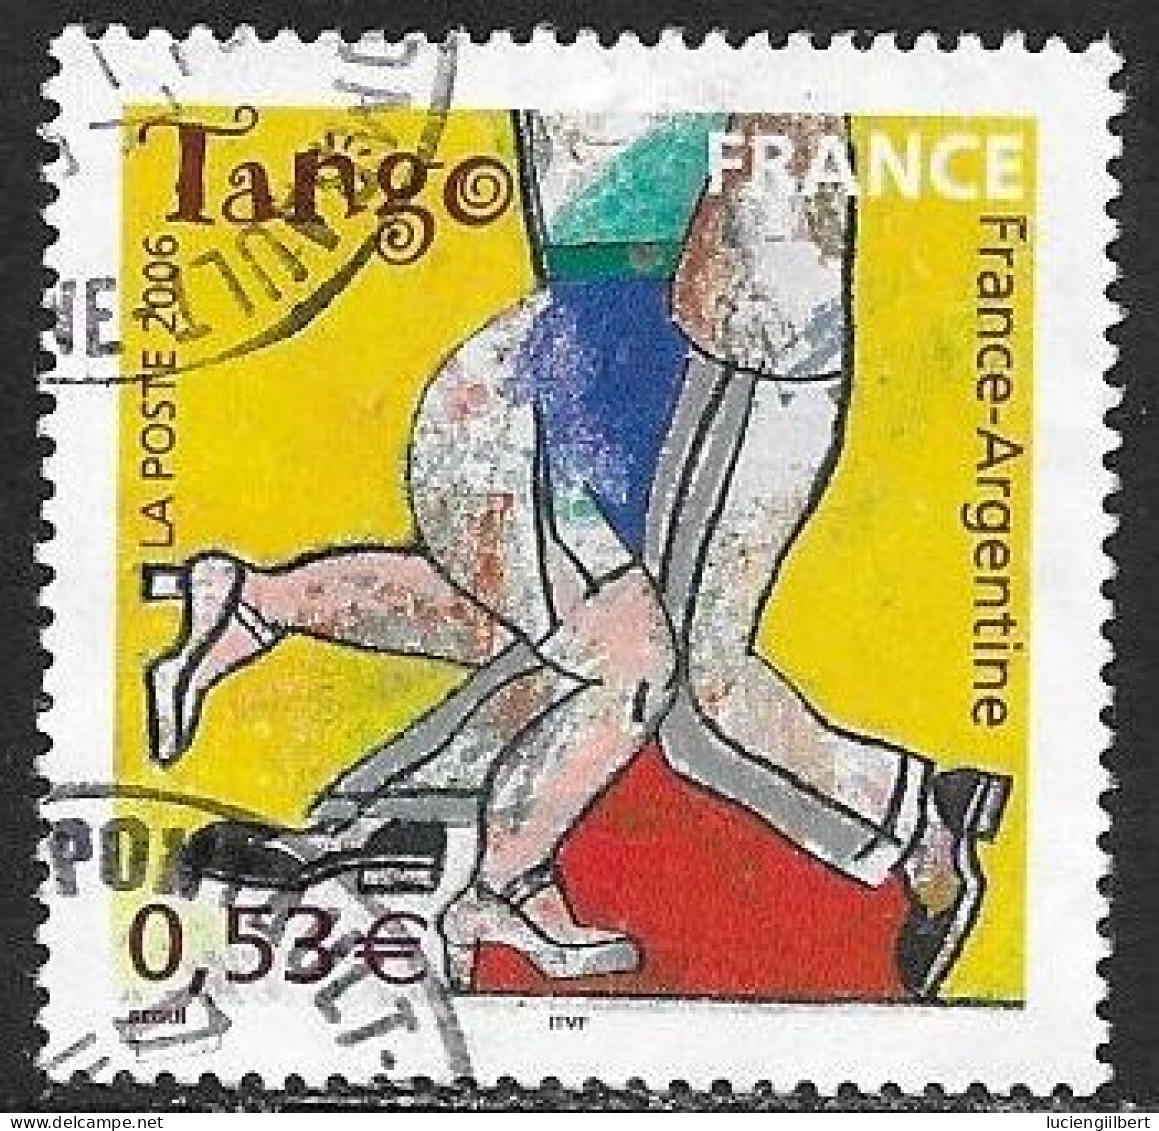 TIMBRE N° 3932 -   FRANCE ARGENTINE LE TANGO       - OBLITERE  -   2006 - Gebraucht